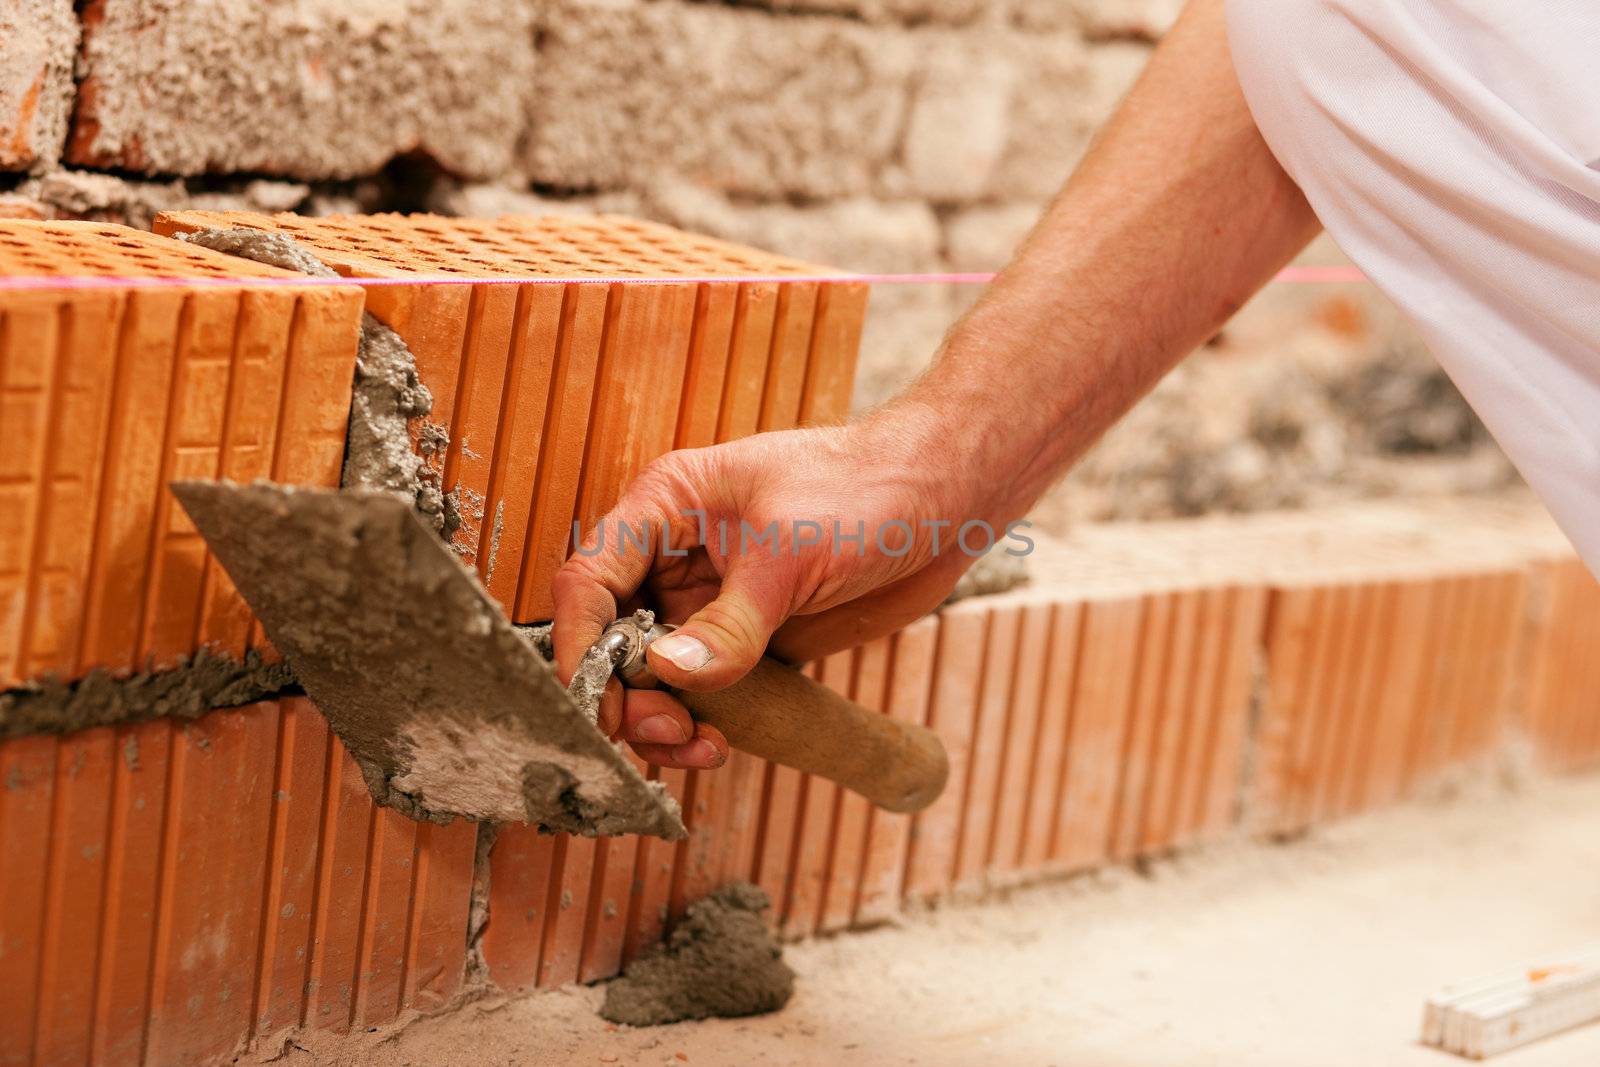 bricklayer laying, well, bricks to make a wall, he is putting grout on a brick with his trowel. This man is really working hard